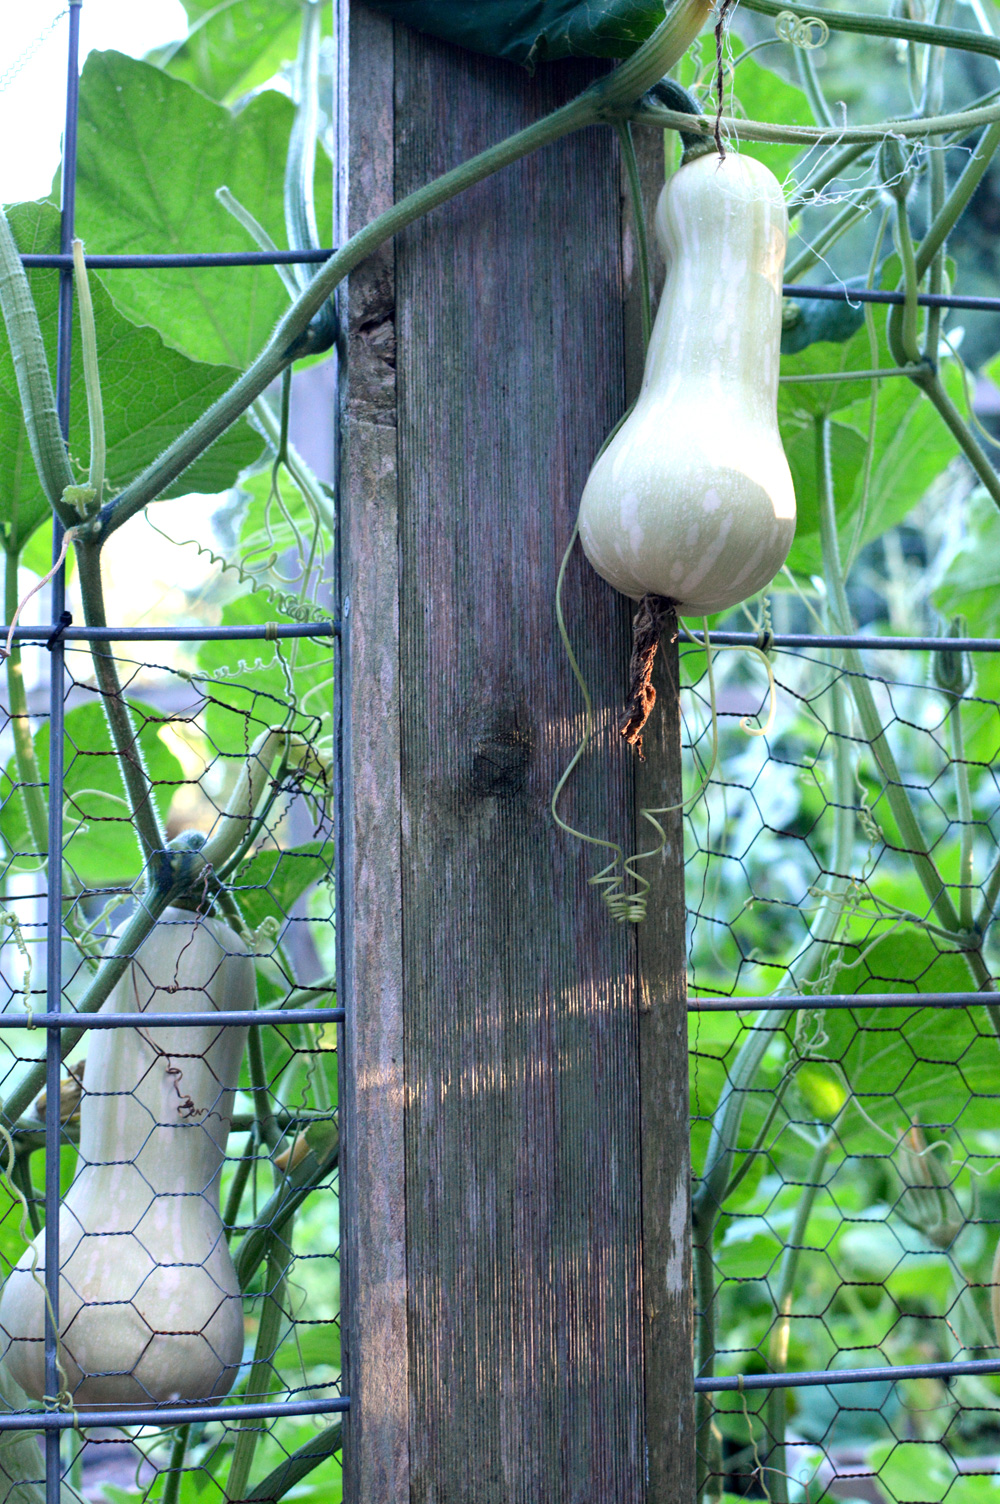  Butternut Squash. Growing it up the fence this year. 